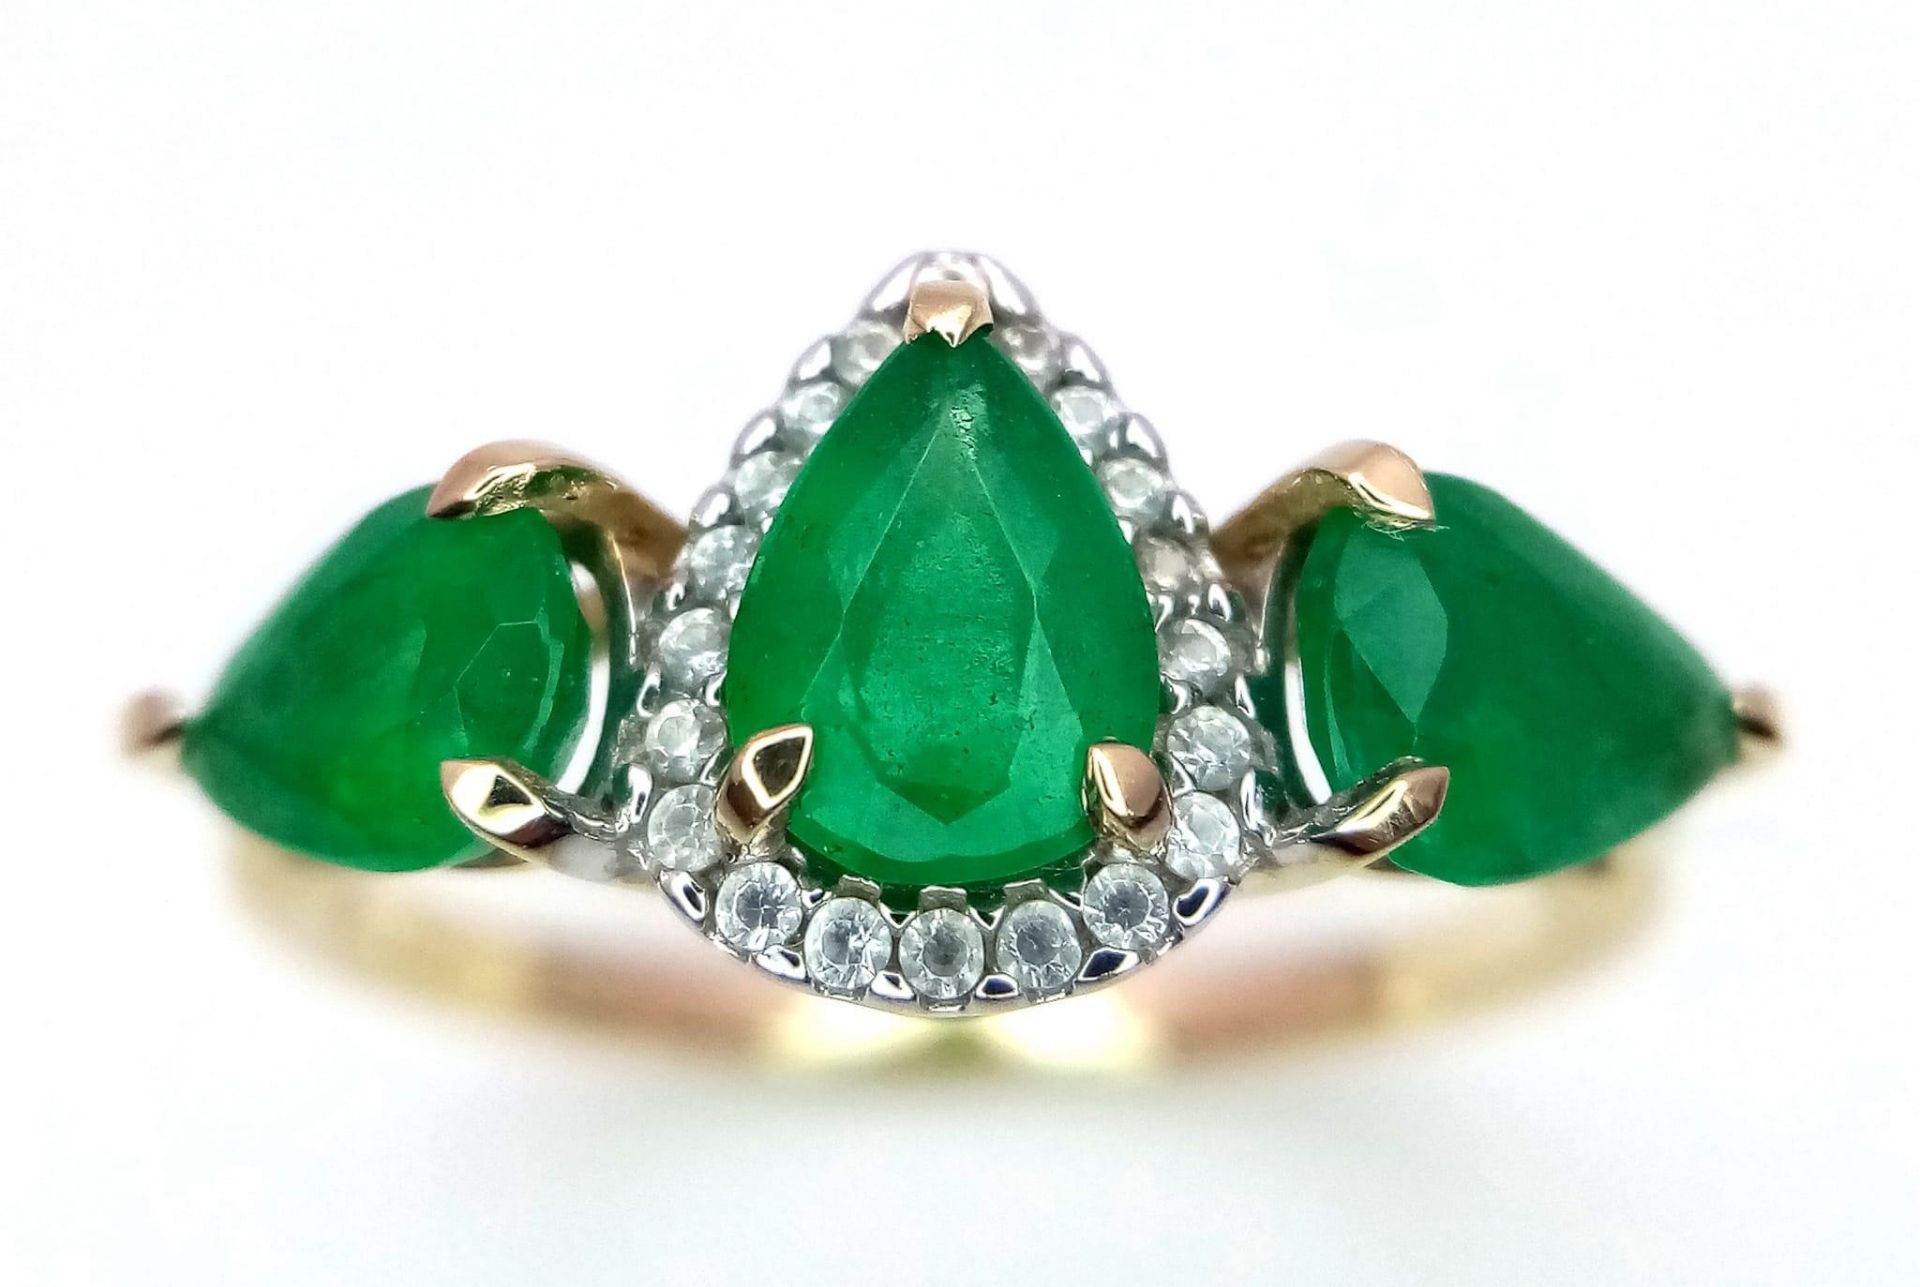 A 9K Yellow Gold and Three Stone Zambian Emerald Ring with a Matching Pendant. White zircon accents. - Bild 2 aus 8